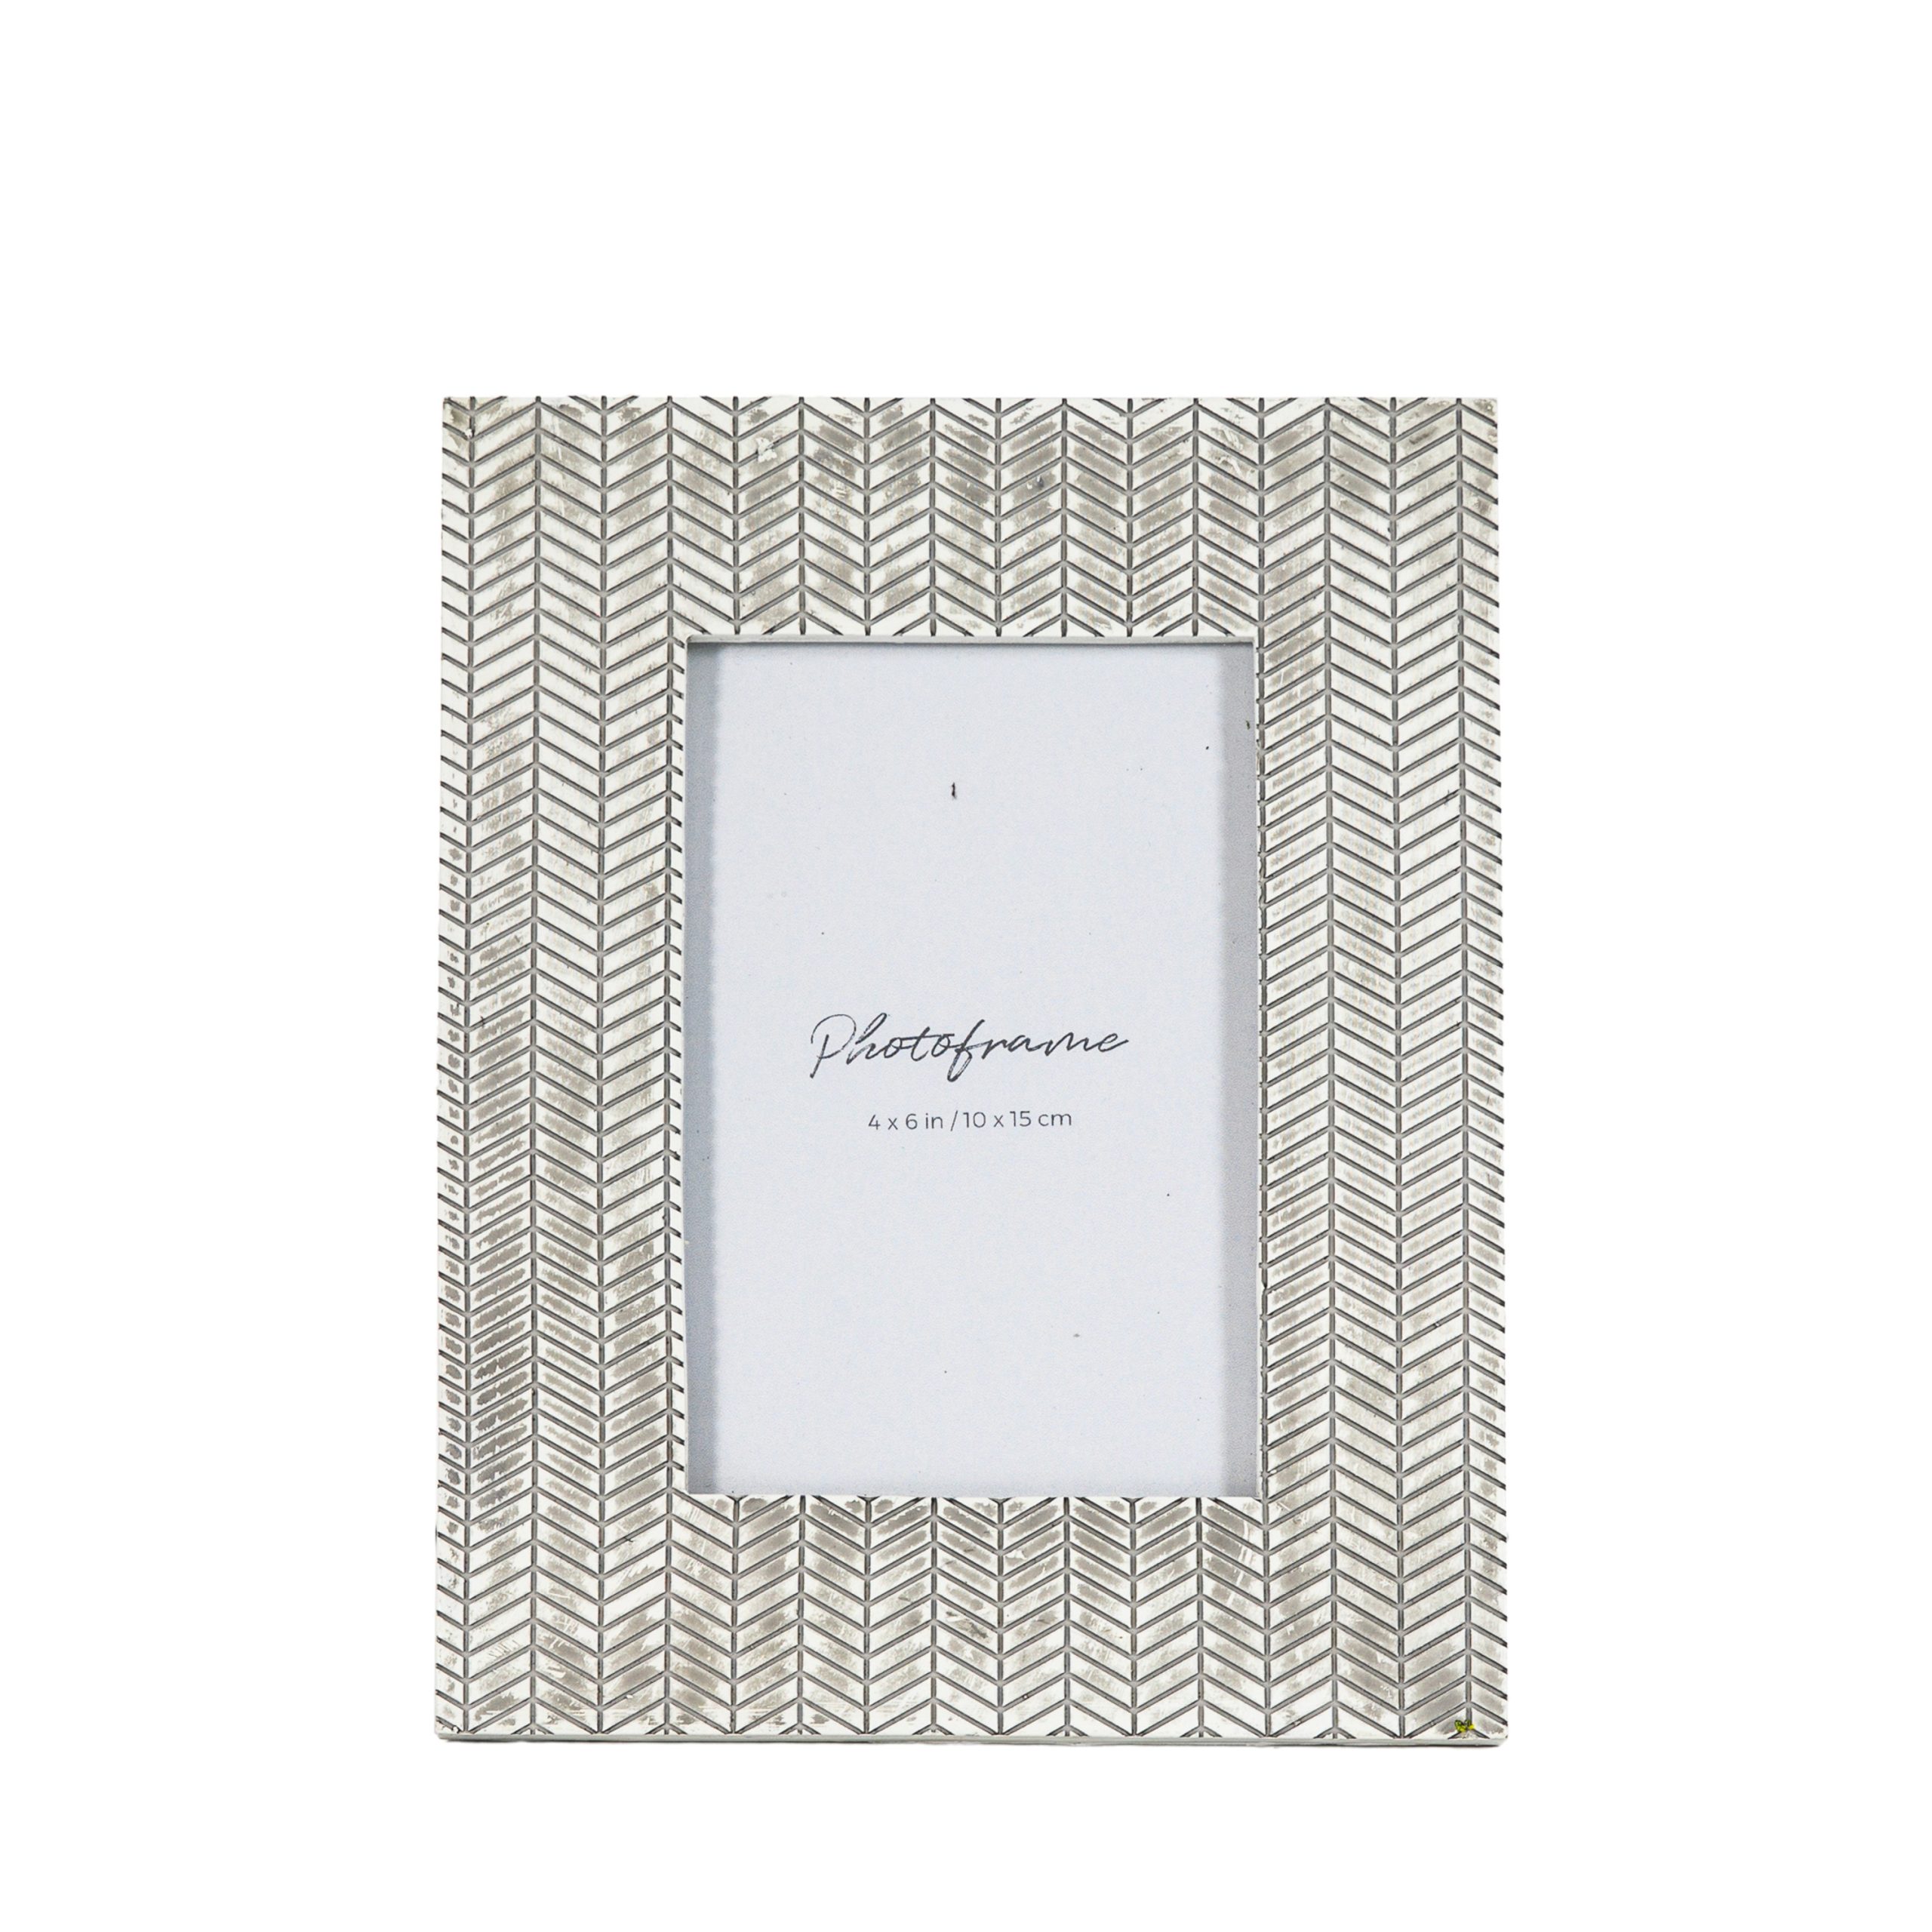 Gallery Direct Manni Photo Frame Distressed Grey